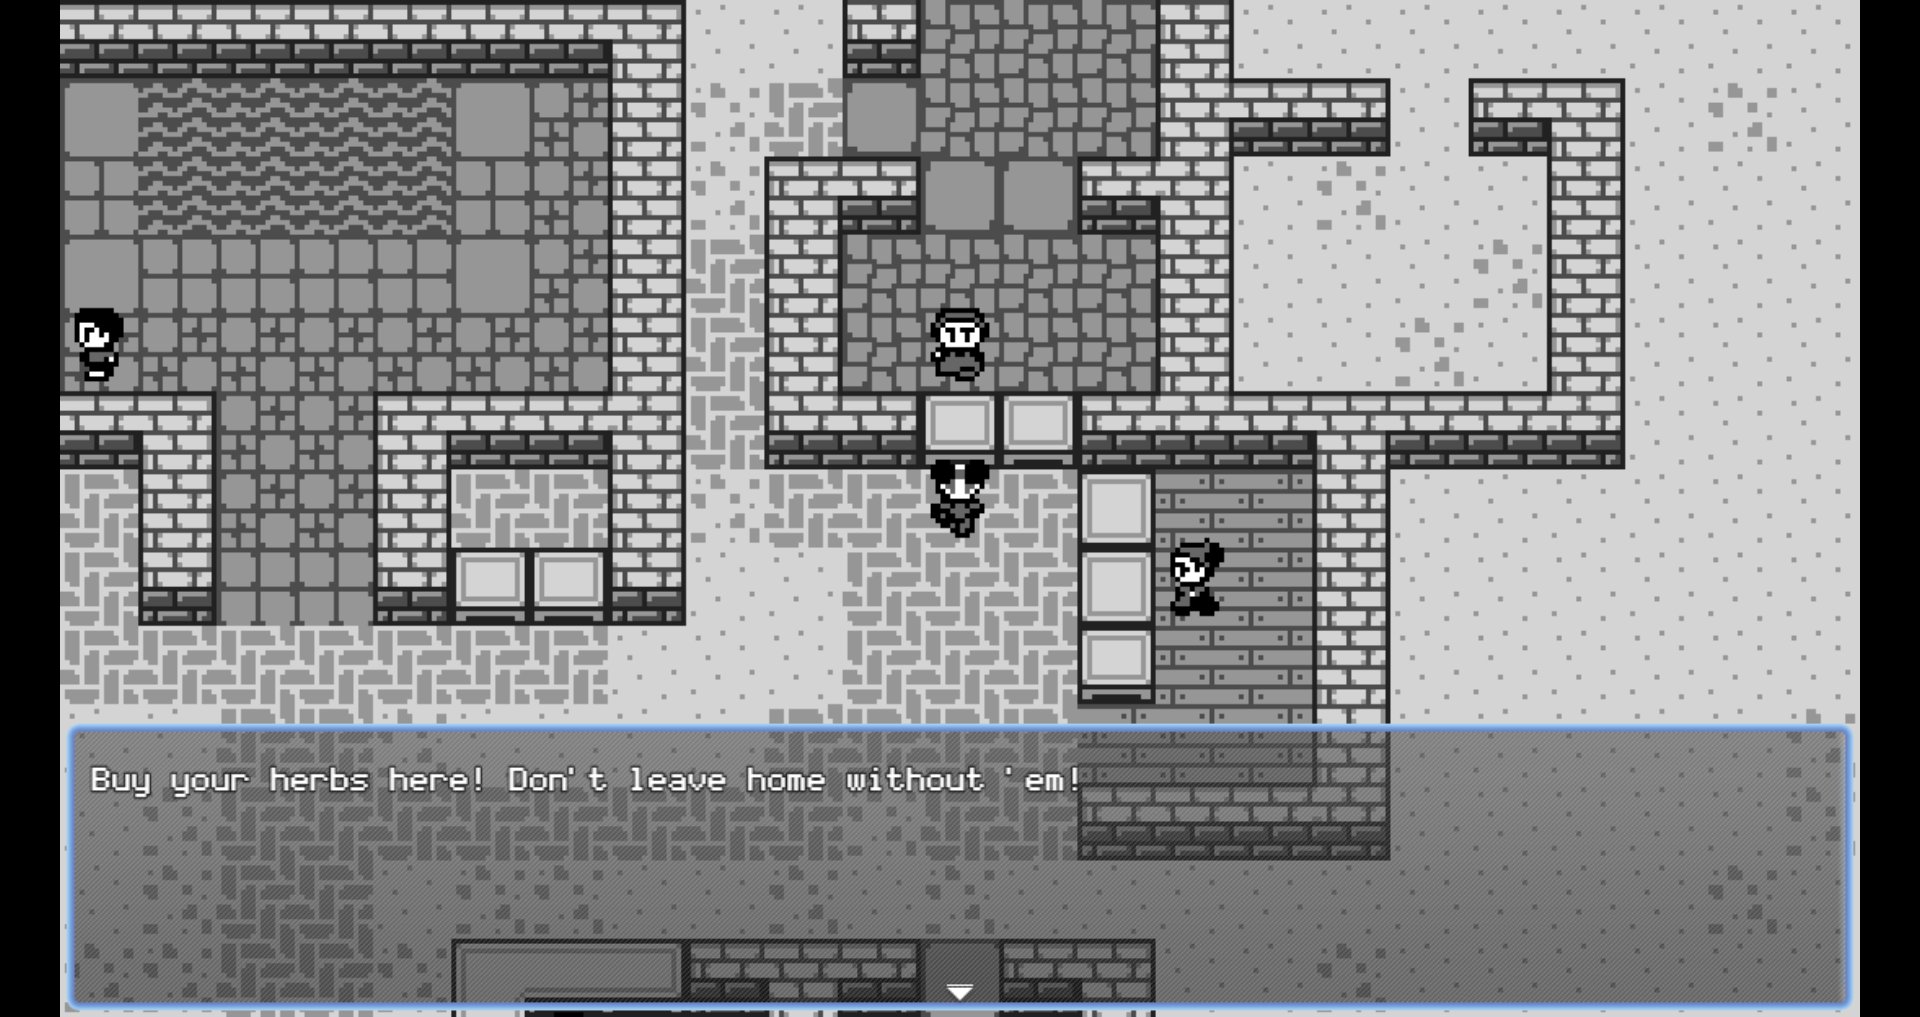 Screenshot of a retro-style video game (mostly) in grayscale. Now the heroine is in town. She's talking over the counter to a man wearing an apron. A blue-white framed translucent gray window at the bottom of the screen shows what he's saying: "Buy your herbs here! Don't leave home without 'em!"
A woman stands behind the counter of an adjacent shop to the heroine's right.